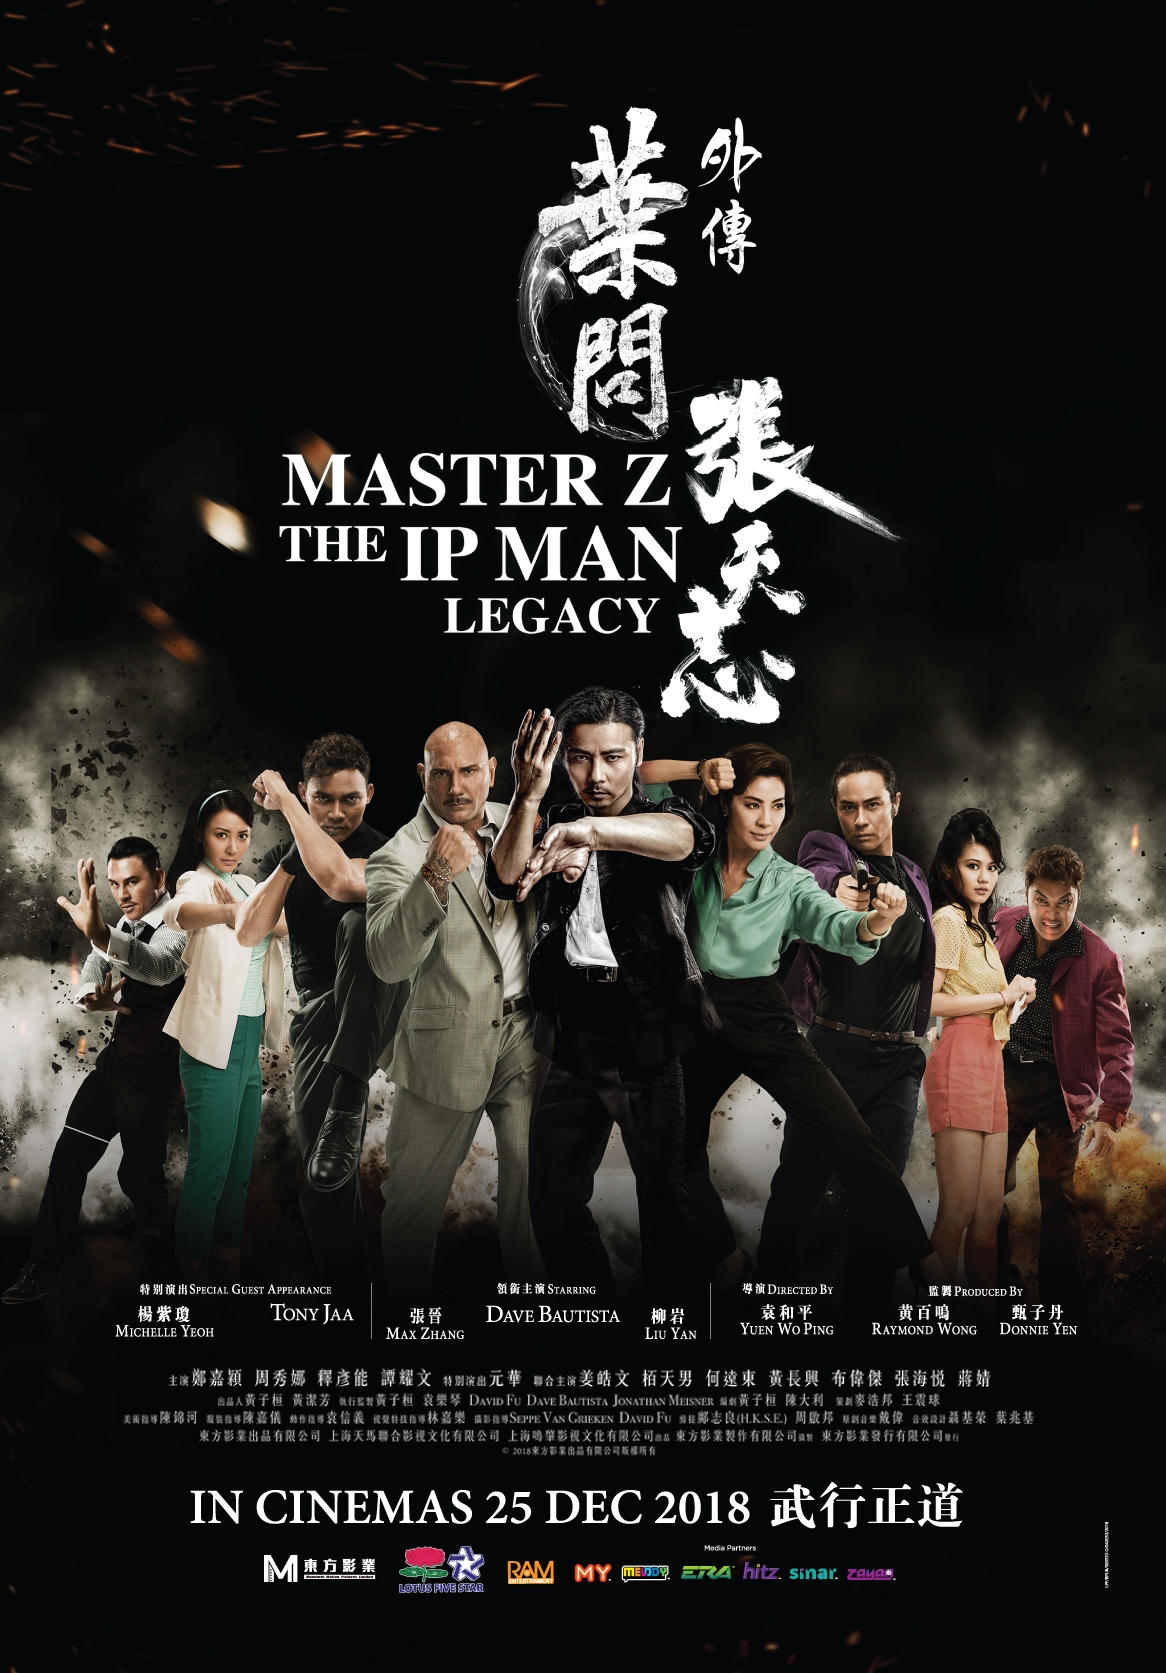 Win Tickets to Catch the Premiere Screening of MASTER Z: THE IP MAN - Master Z The Ip Man Legacy